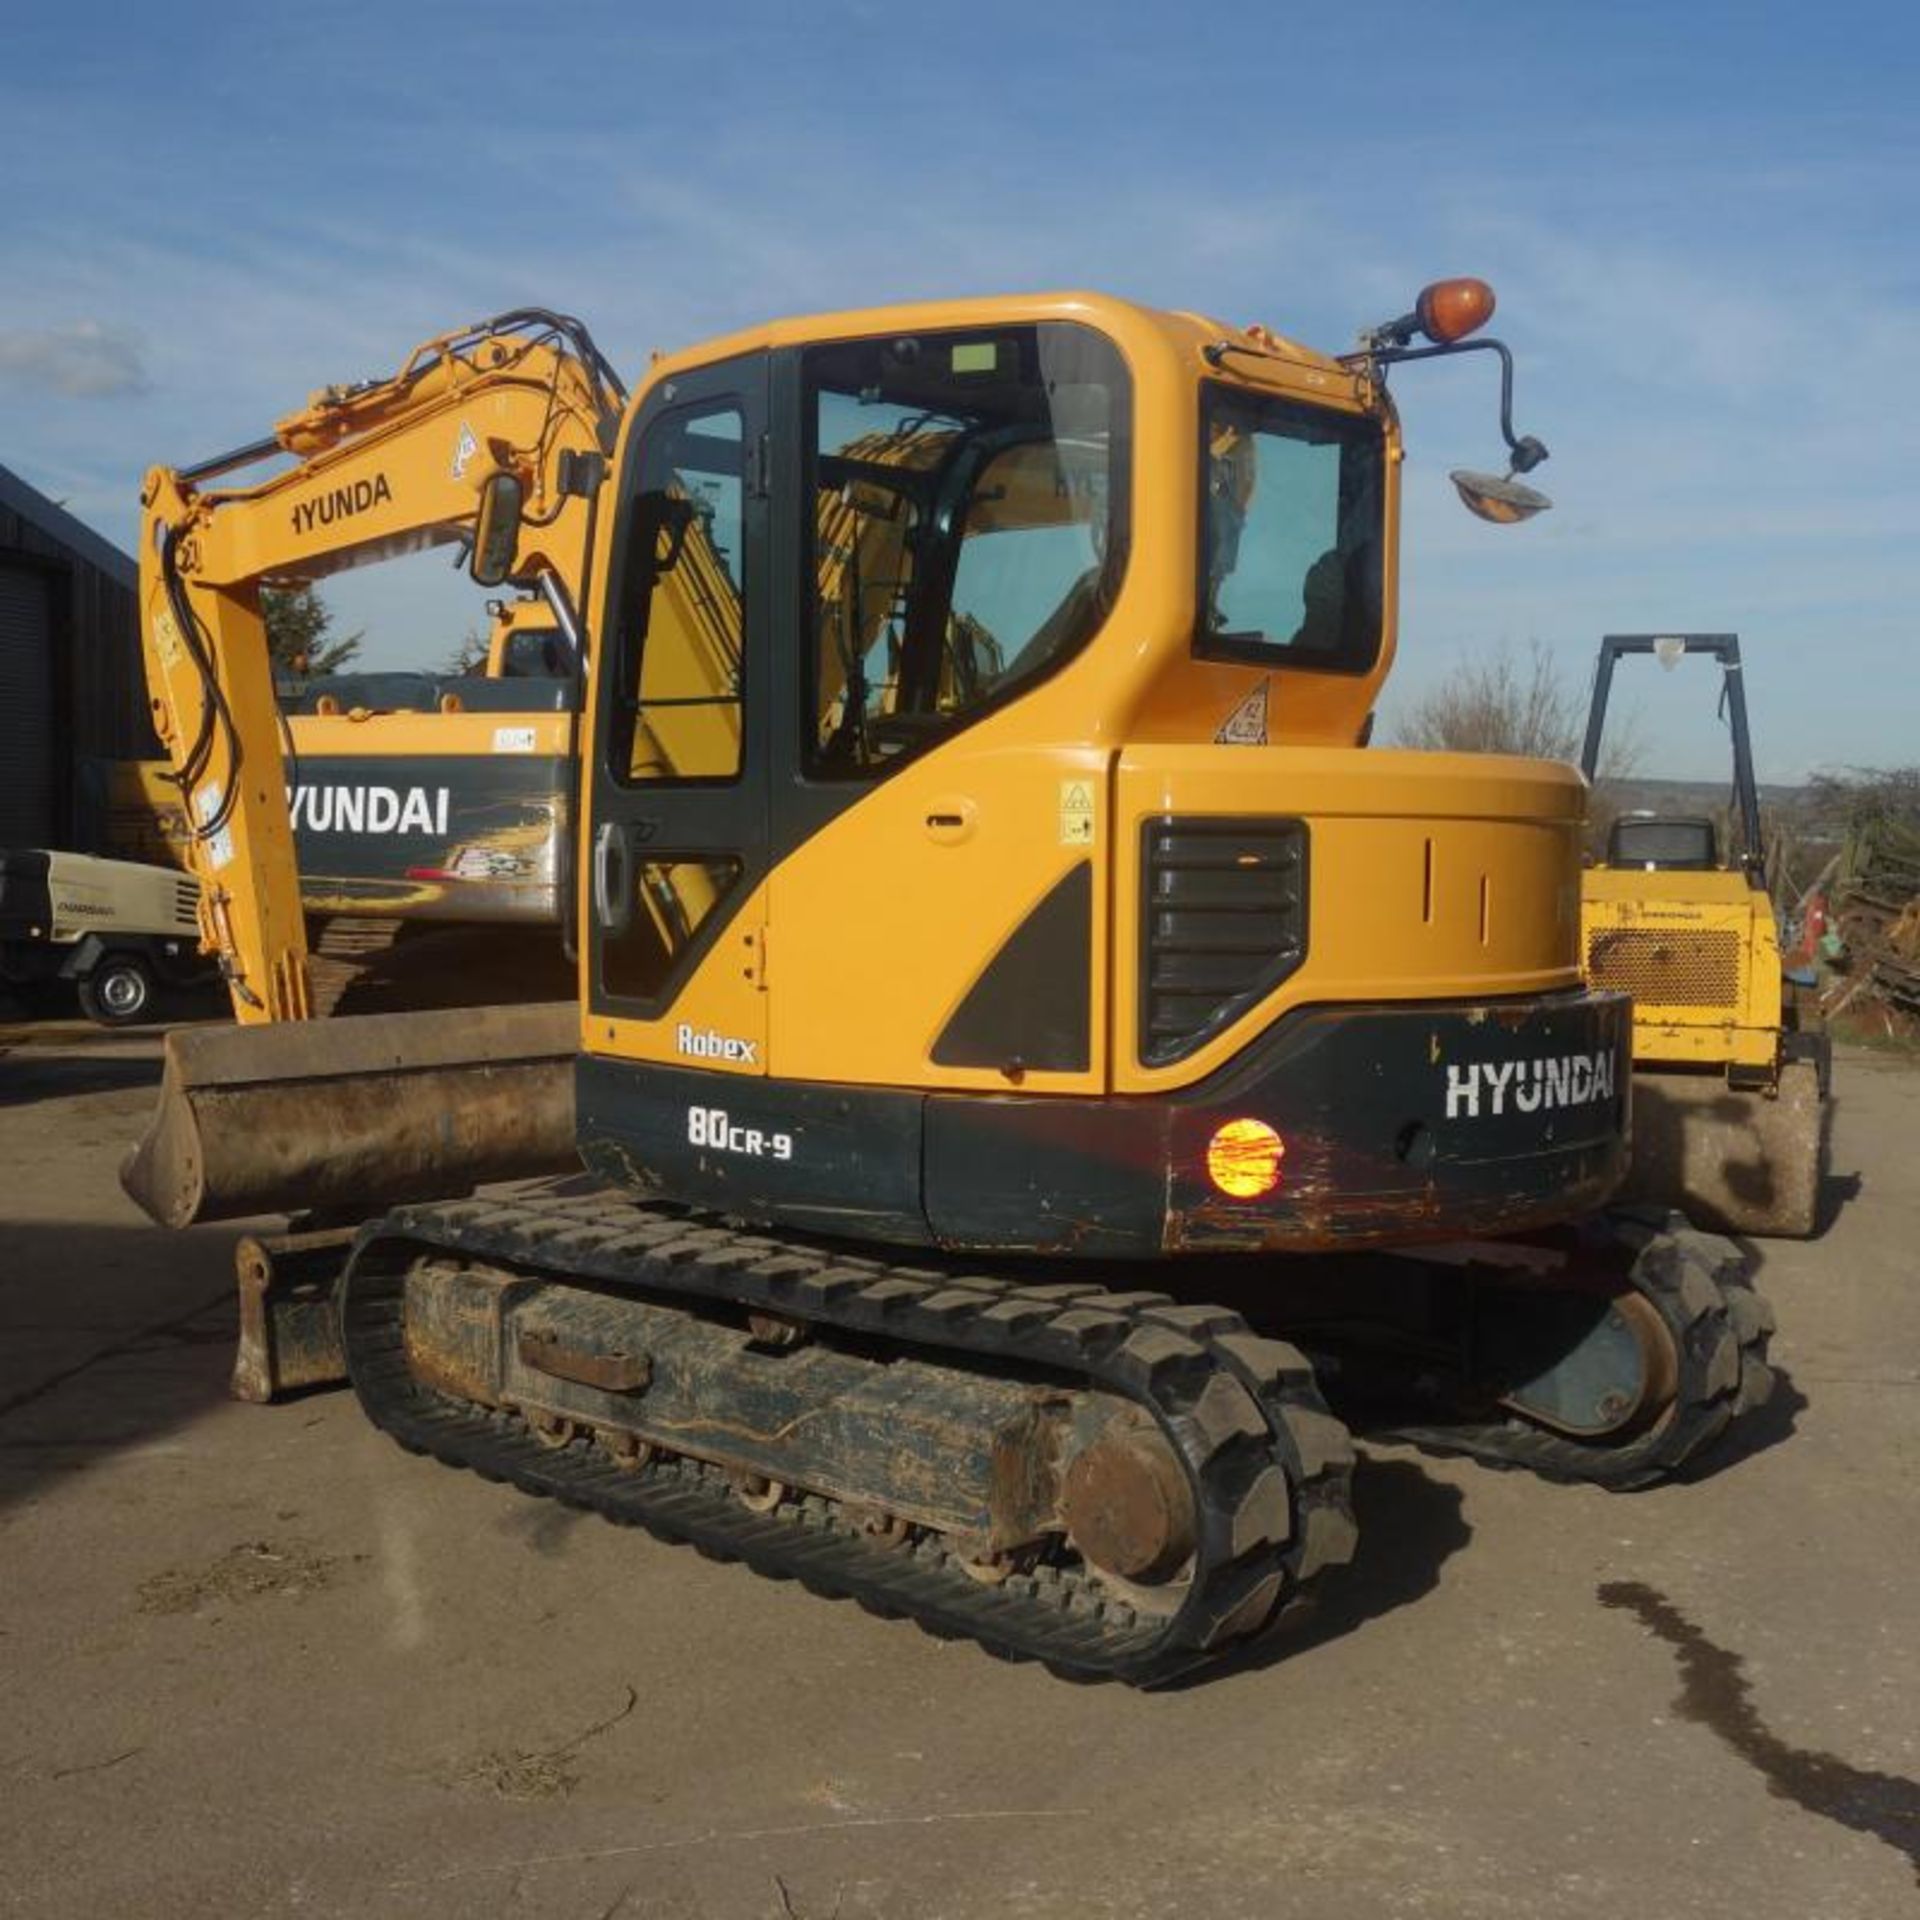 2014 Hyundai 80CR-9 Digger, Comes With 4 Buckets, 2290 Hours From New - Bild 3 aus 6